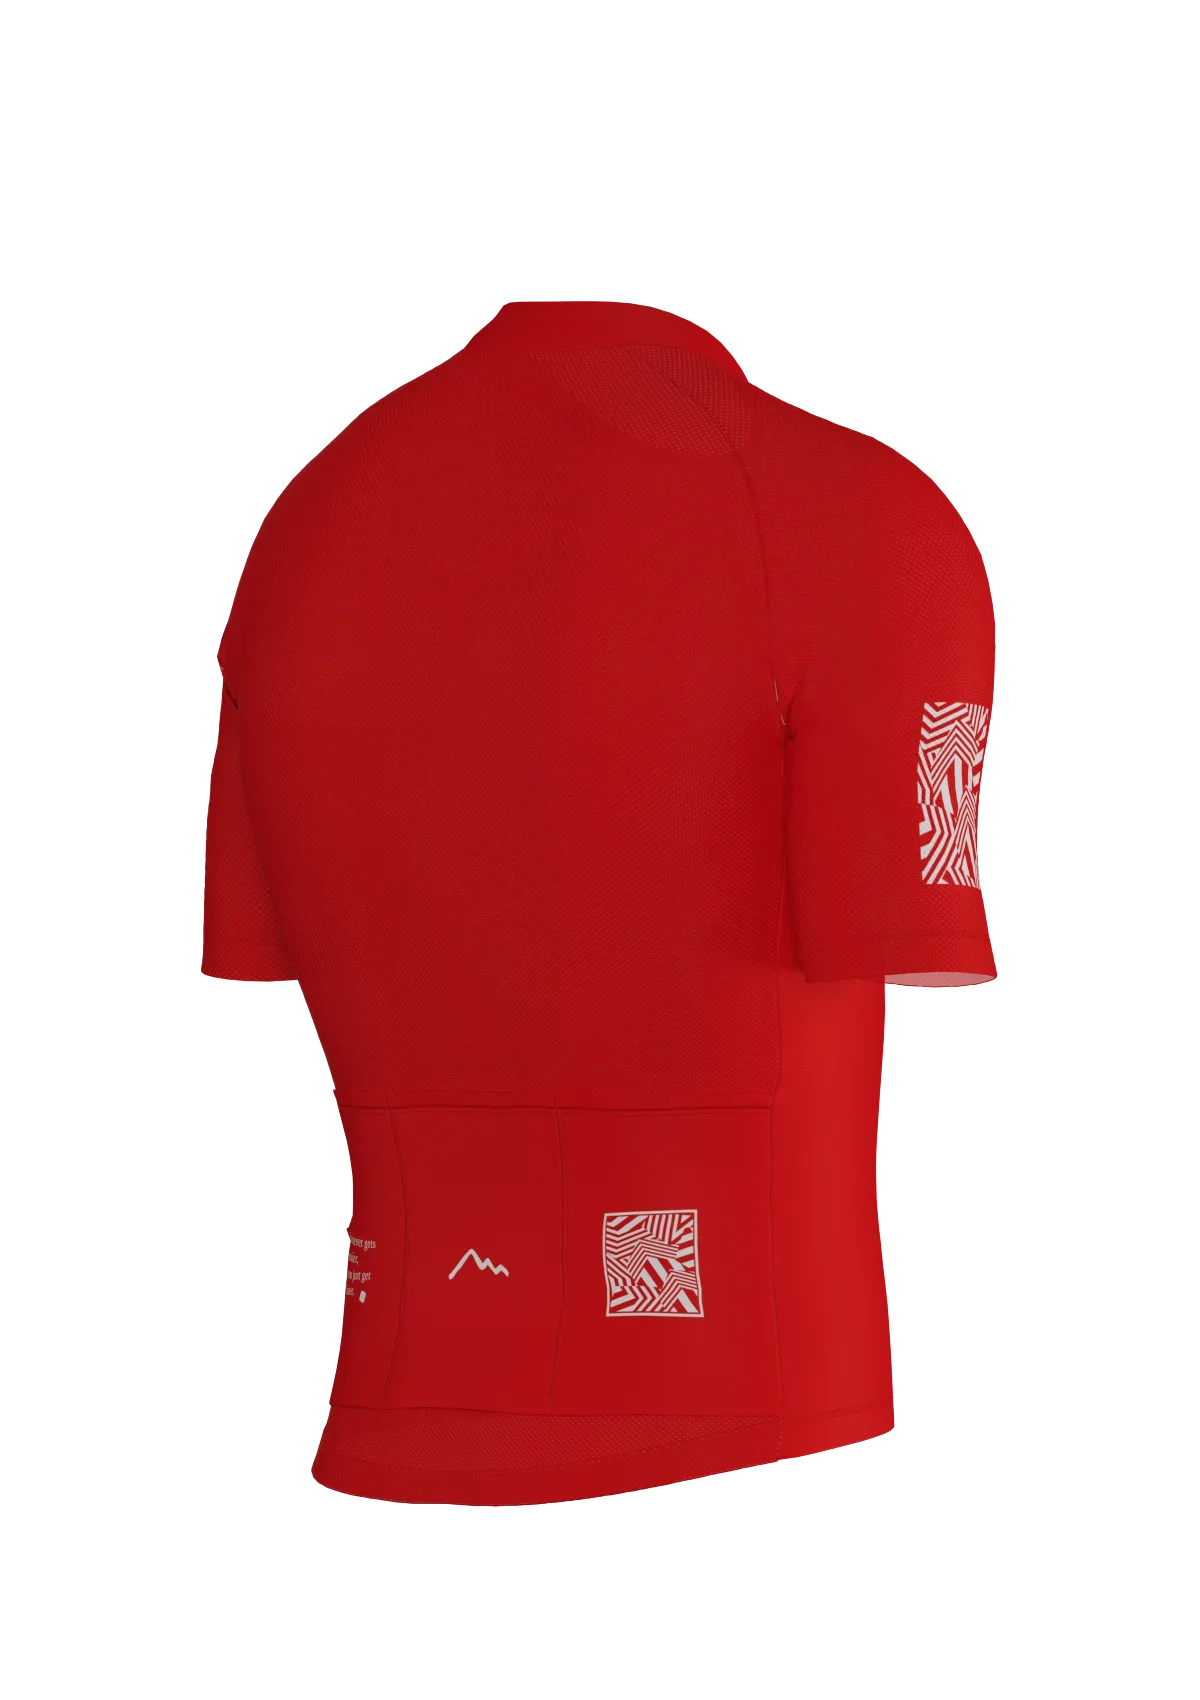 Classic red cycling jersey